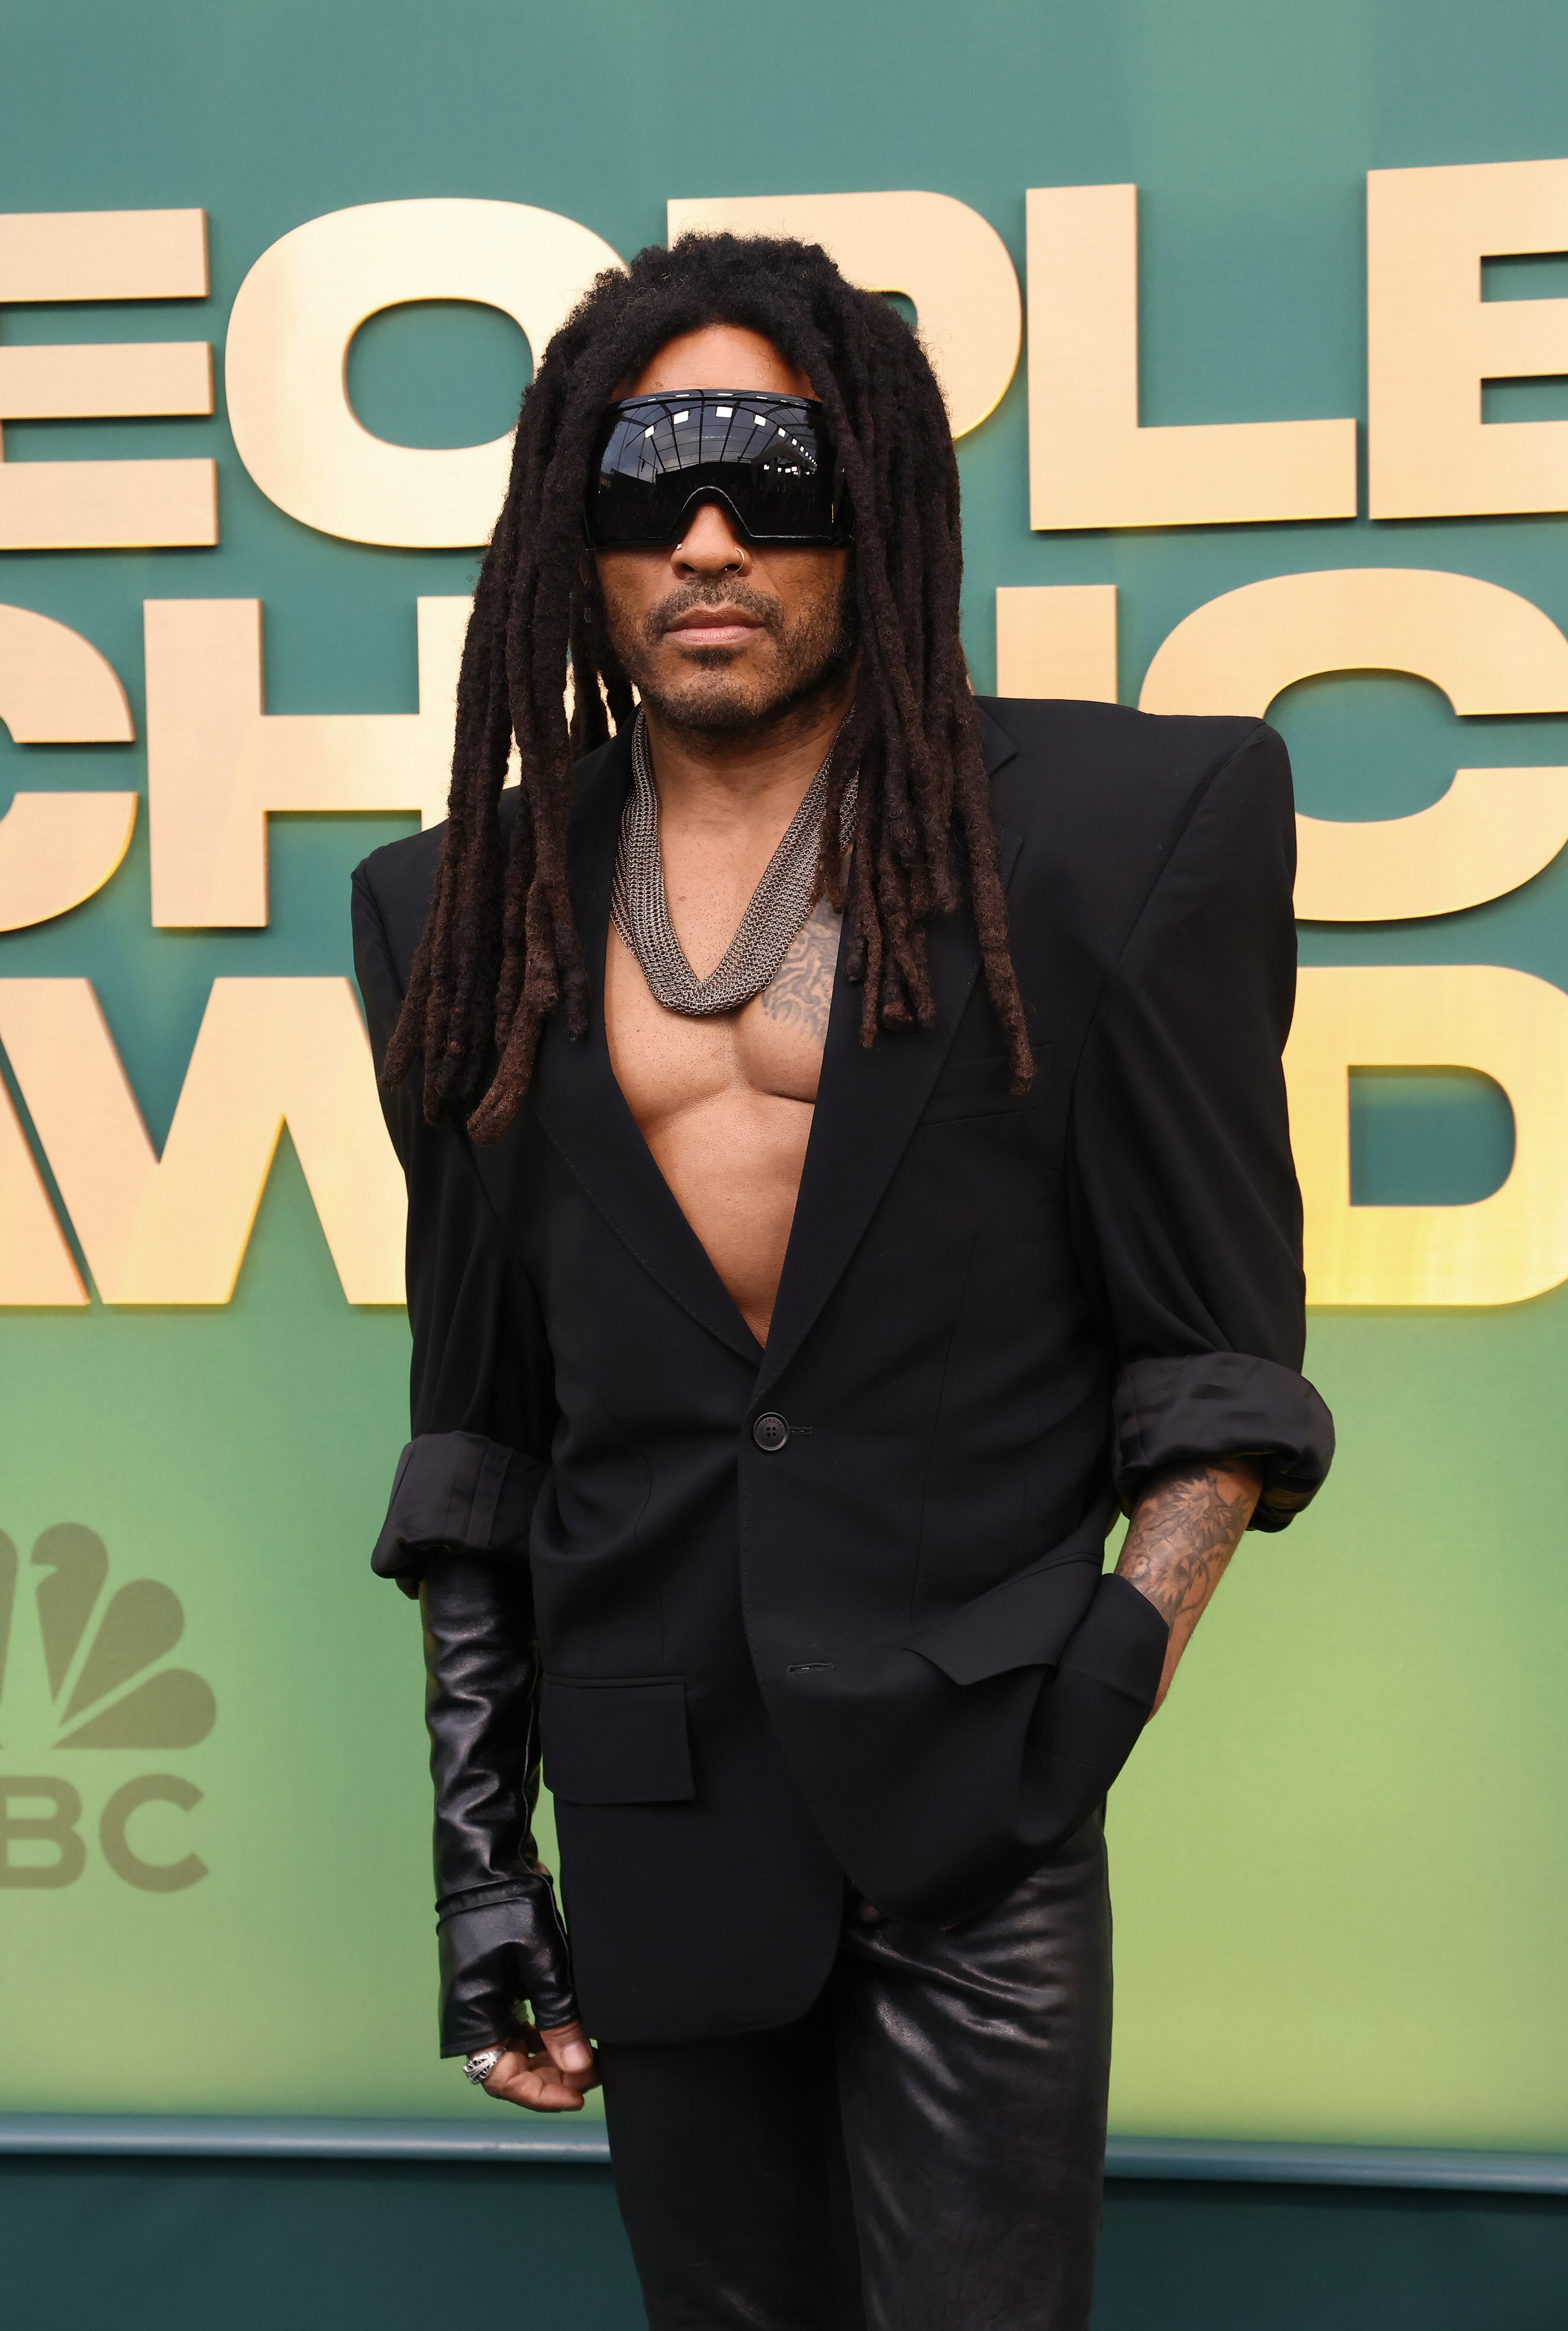 Lenny Kravitz wearing a black suit with a big pair of sunnies on